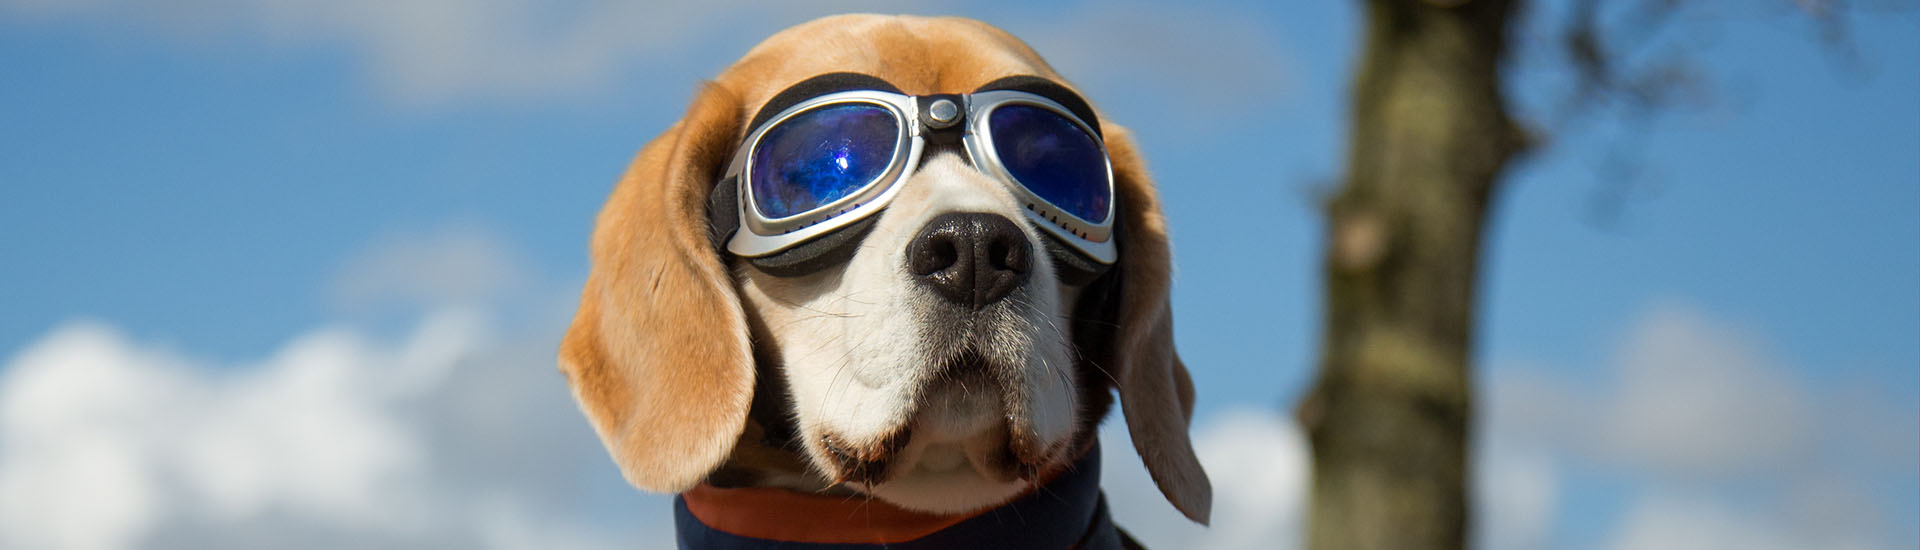 Beagle dog wearing blue flying glasses or goggles, sitting in a bicycle basket on a sunny day